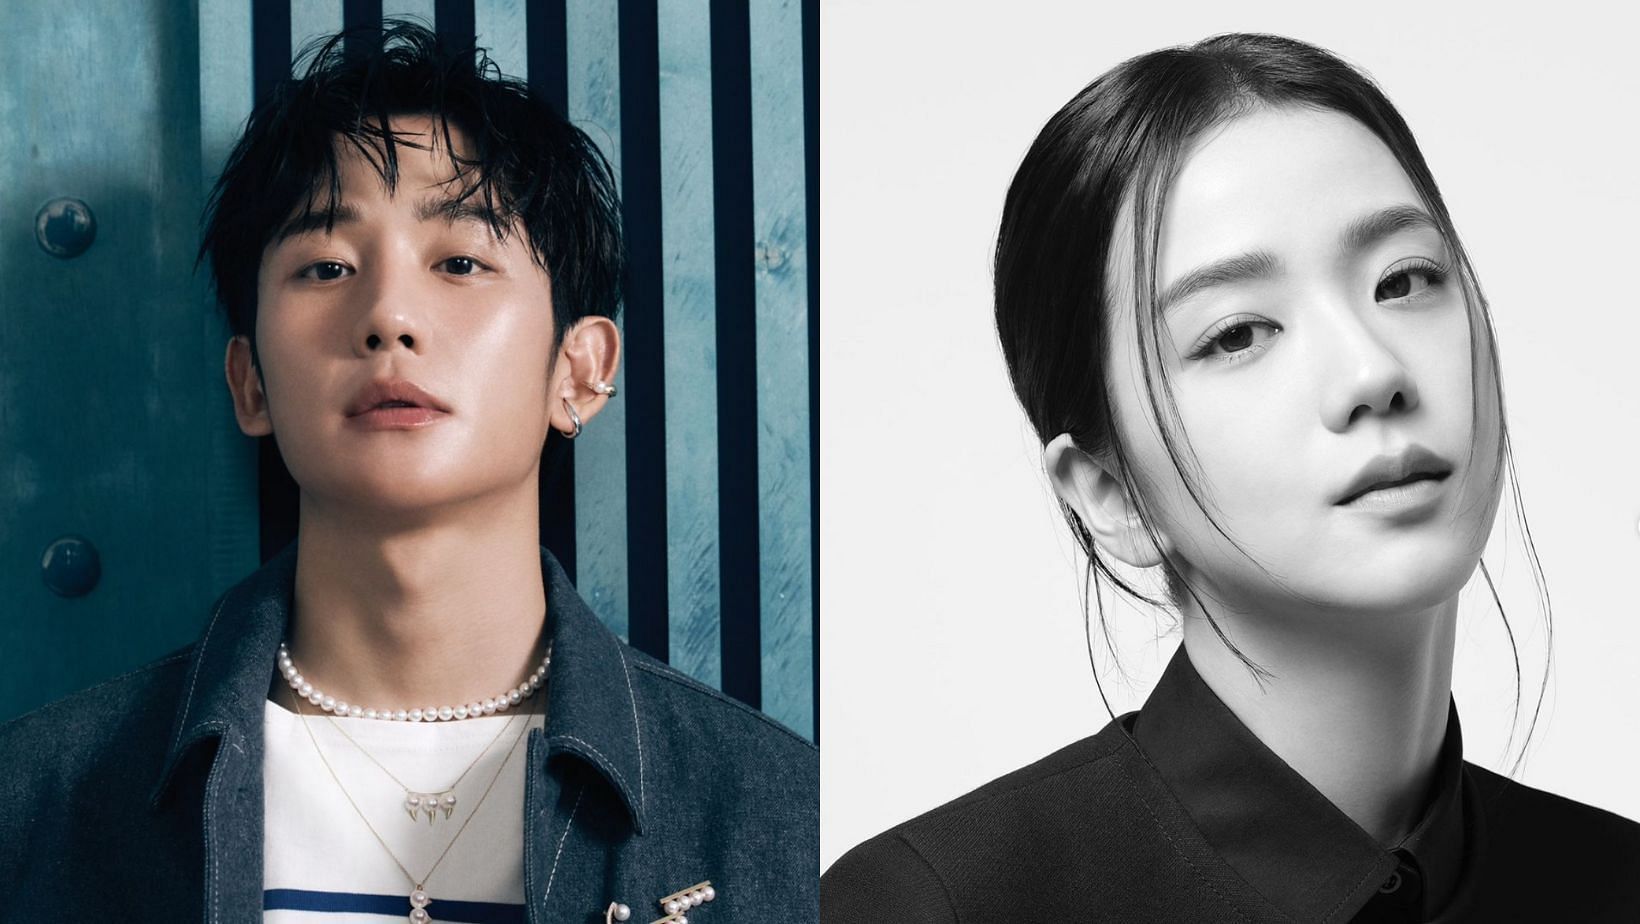 Jung Hae-in recalls a memory with BLACKPINK&rsquo;s Jisoo from the sets of &lsquo;Snowdrop&rsquo; in a recent interview. (Images via Instagram/@holyhaein, @sooyaaa__)